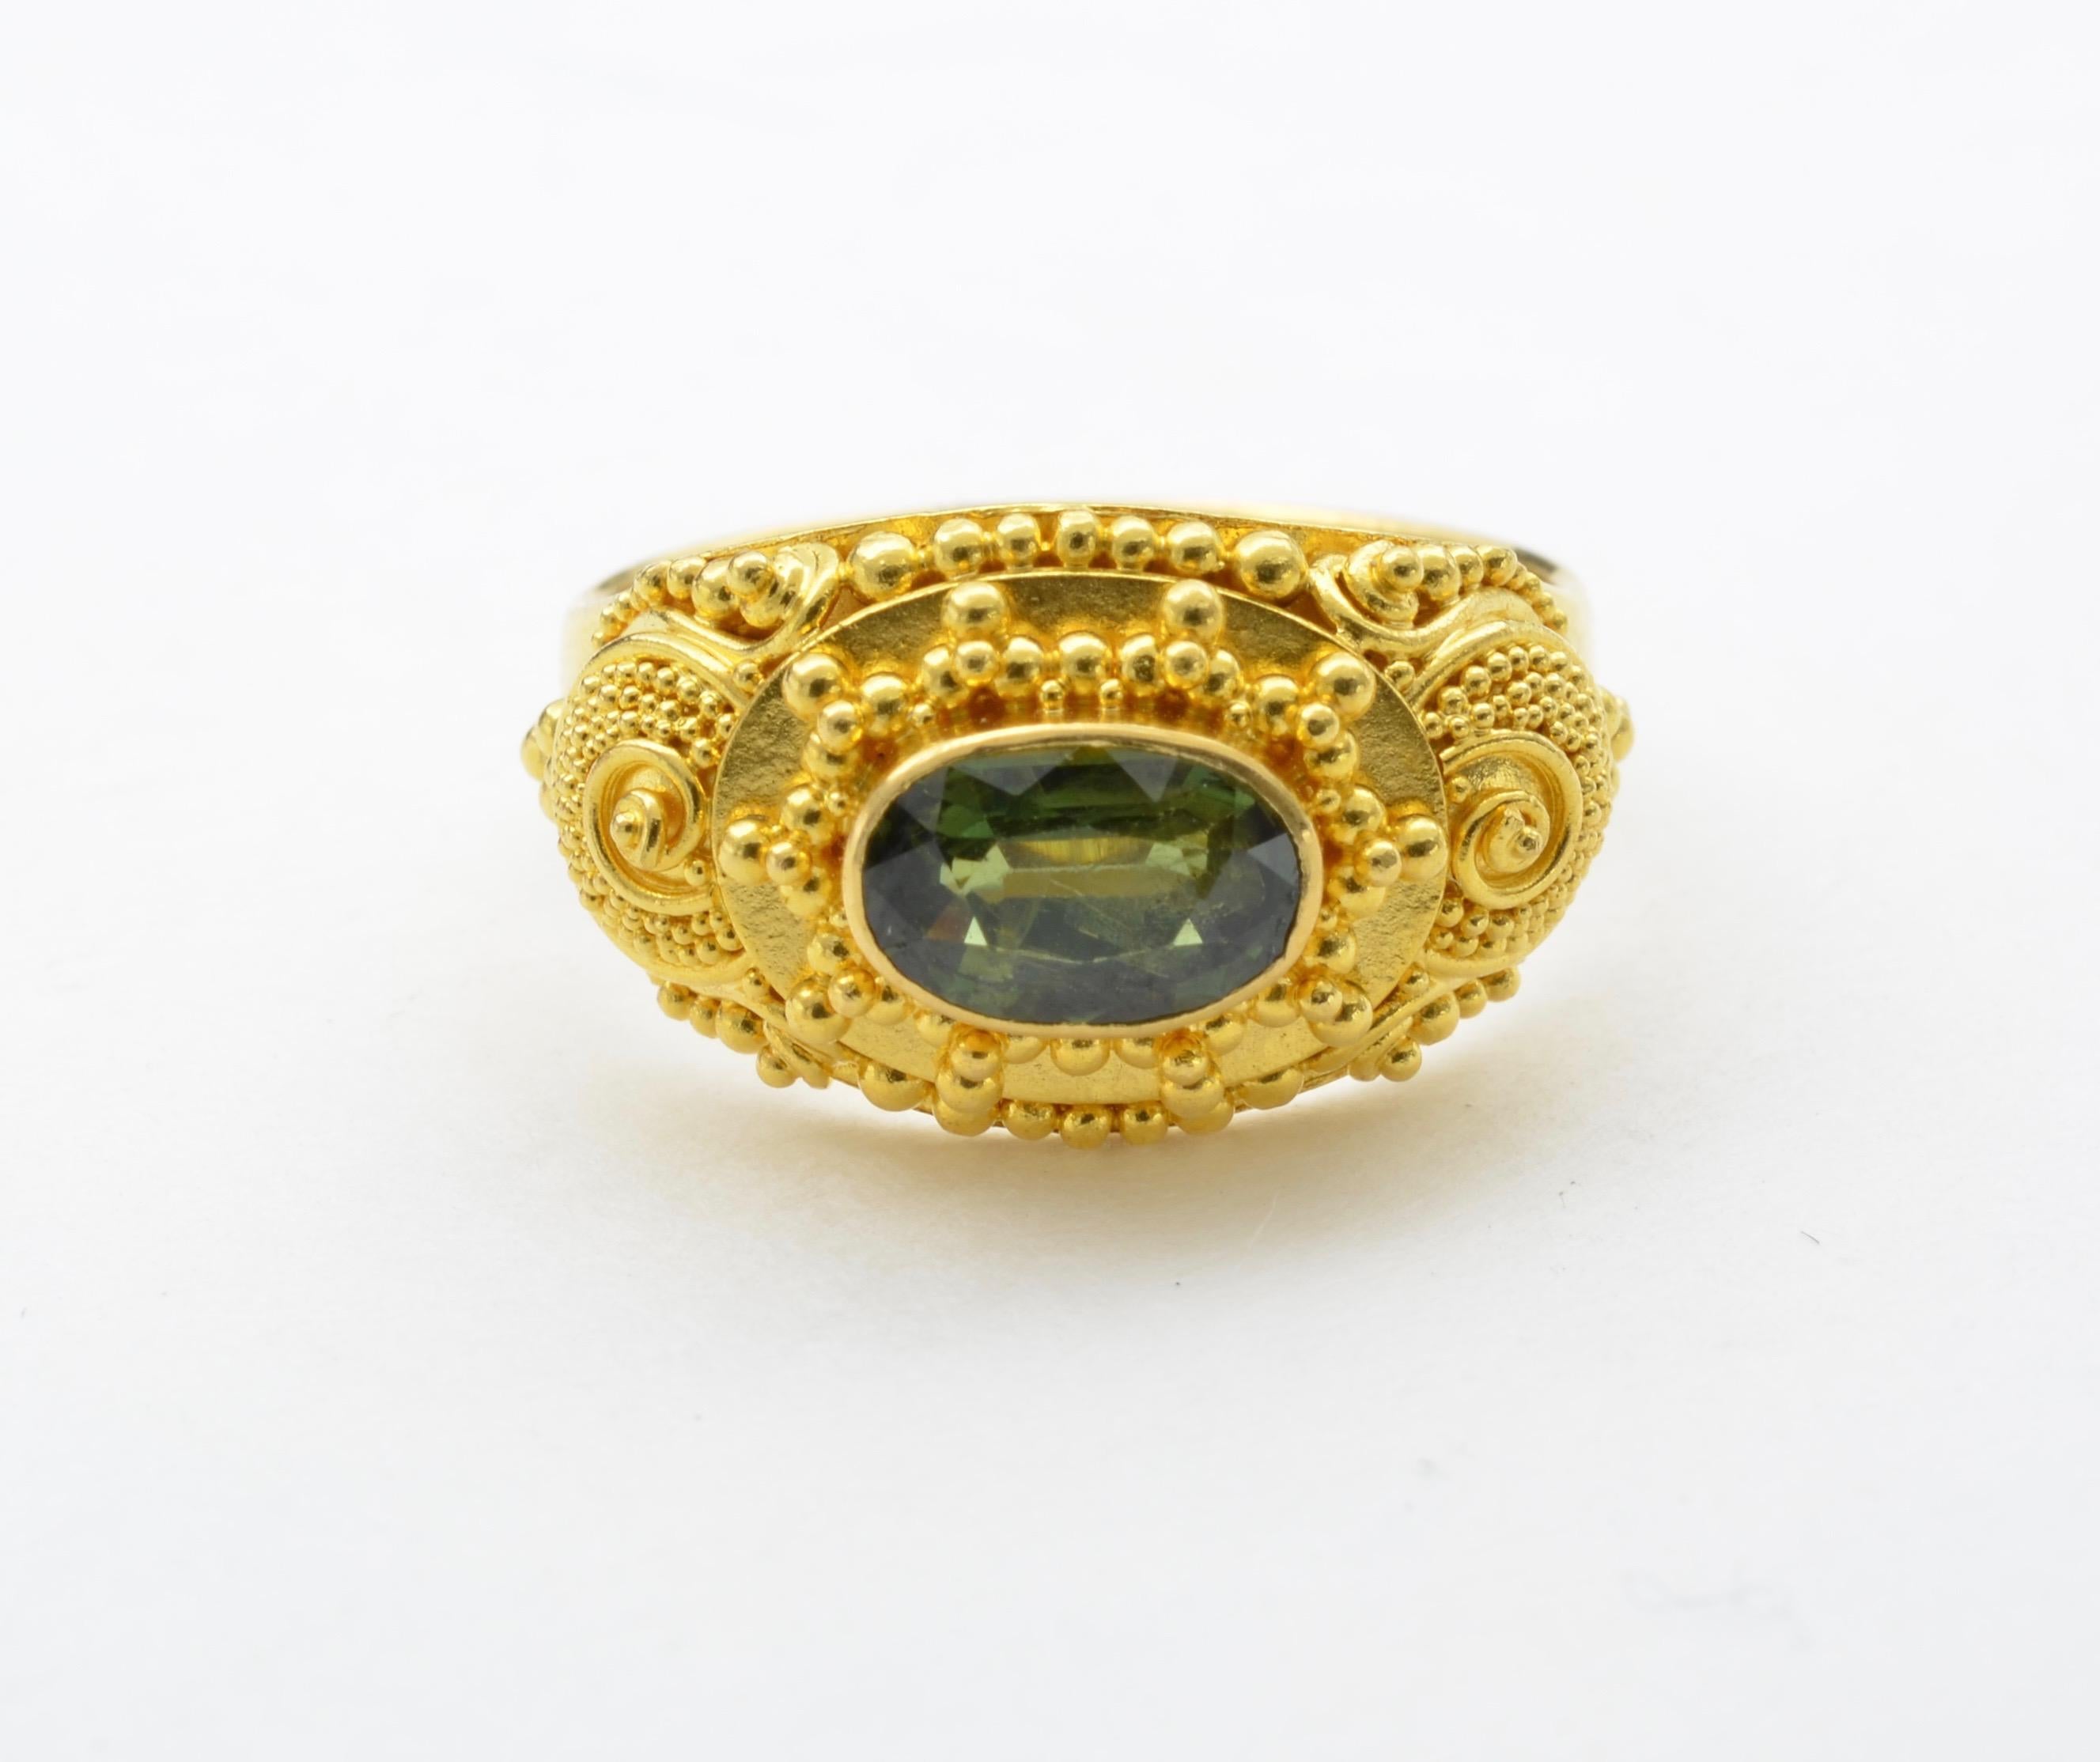 Green ‘Approximate 1.0 Carat’ Tourmaline Ring in 22 Karat Gold with Granulation In Excellent Condition For Sale In Berkeley, CA